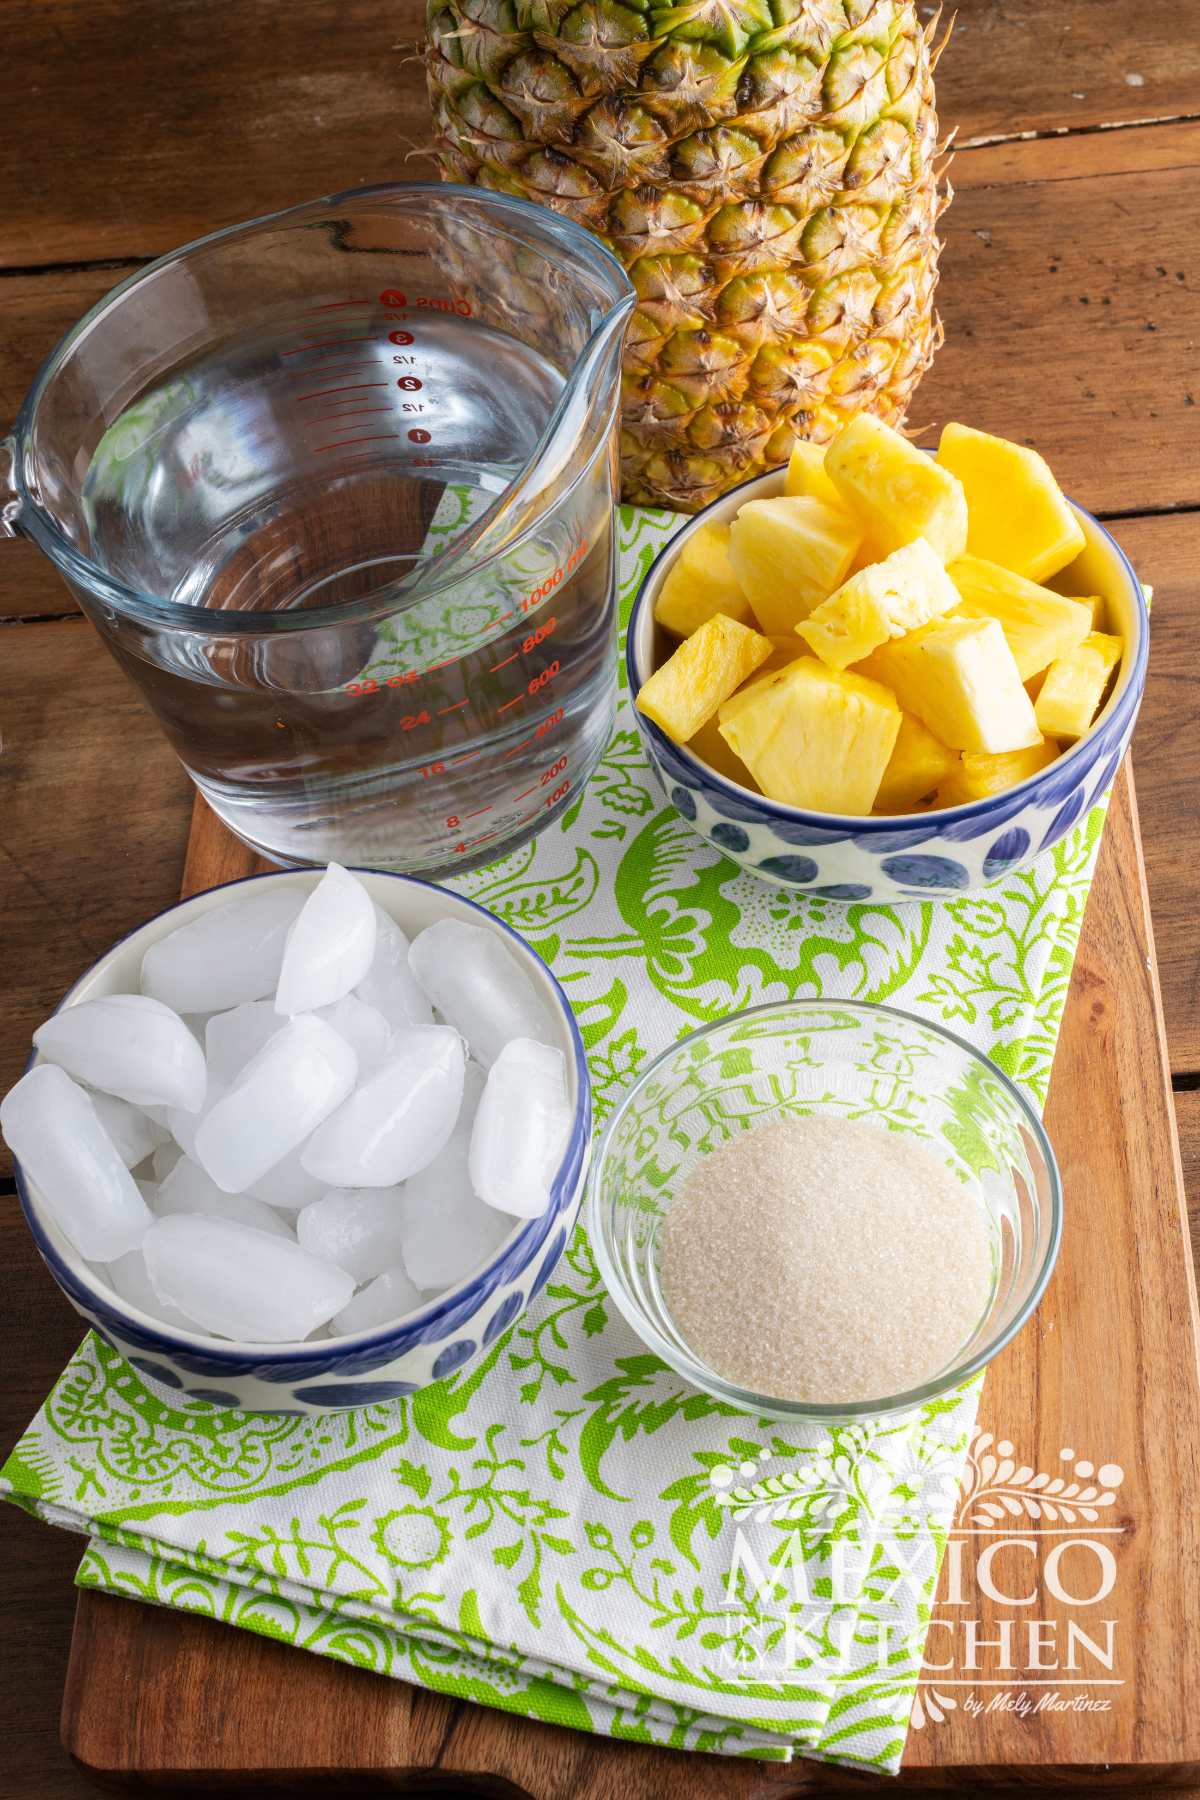 Ingredientes like ice, sugar, water and fresh pineapple, over a cutting board